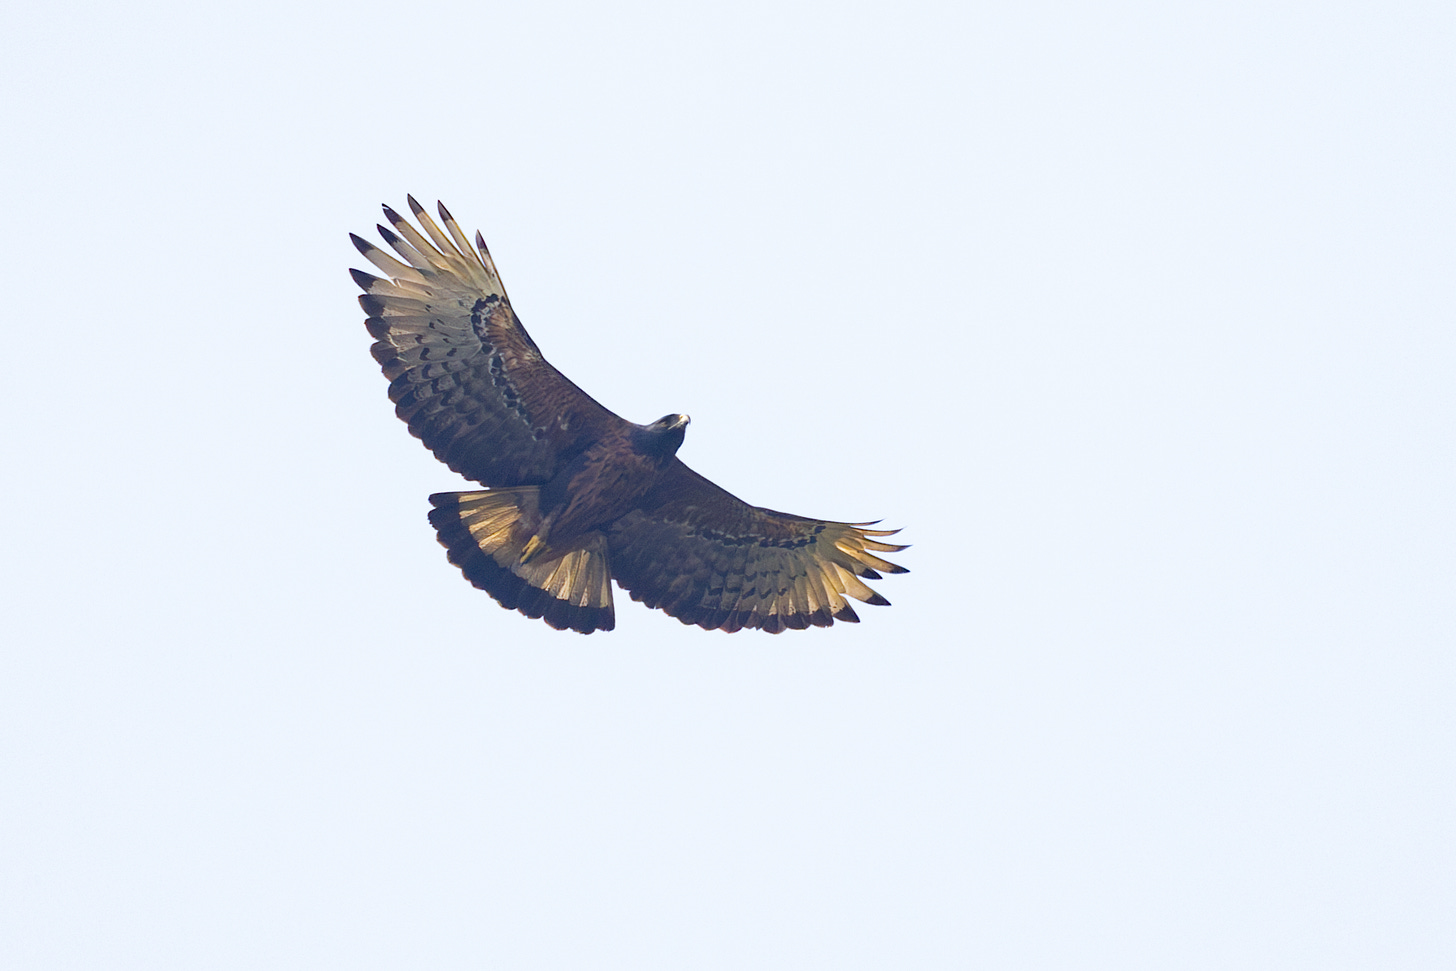 aan eagle soaring against a white sky with a chestnut belly, black head, big fanned tail with black band. its wings are open and curved slightly up.